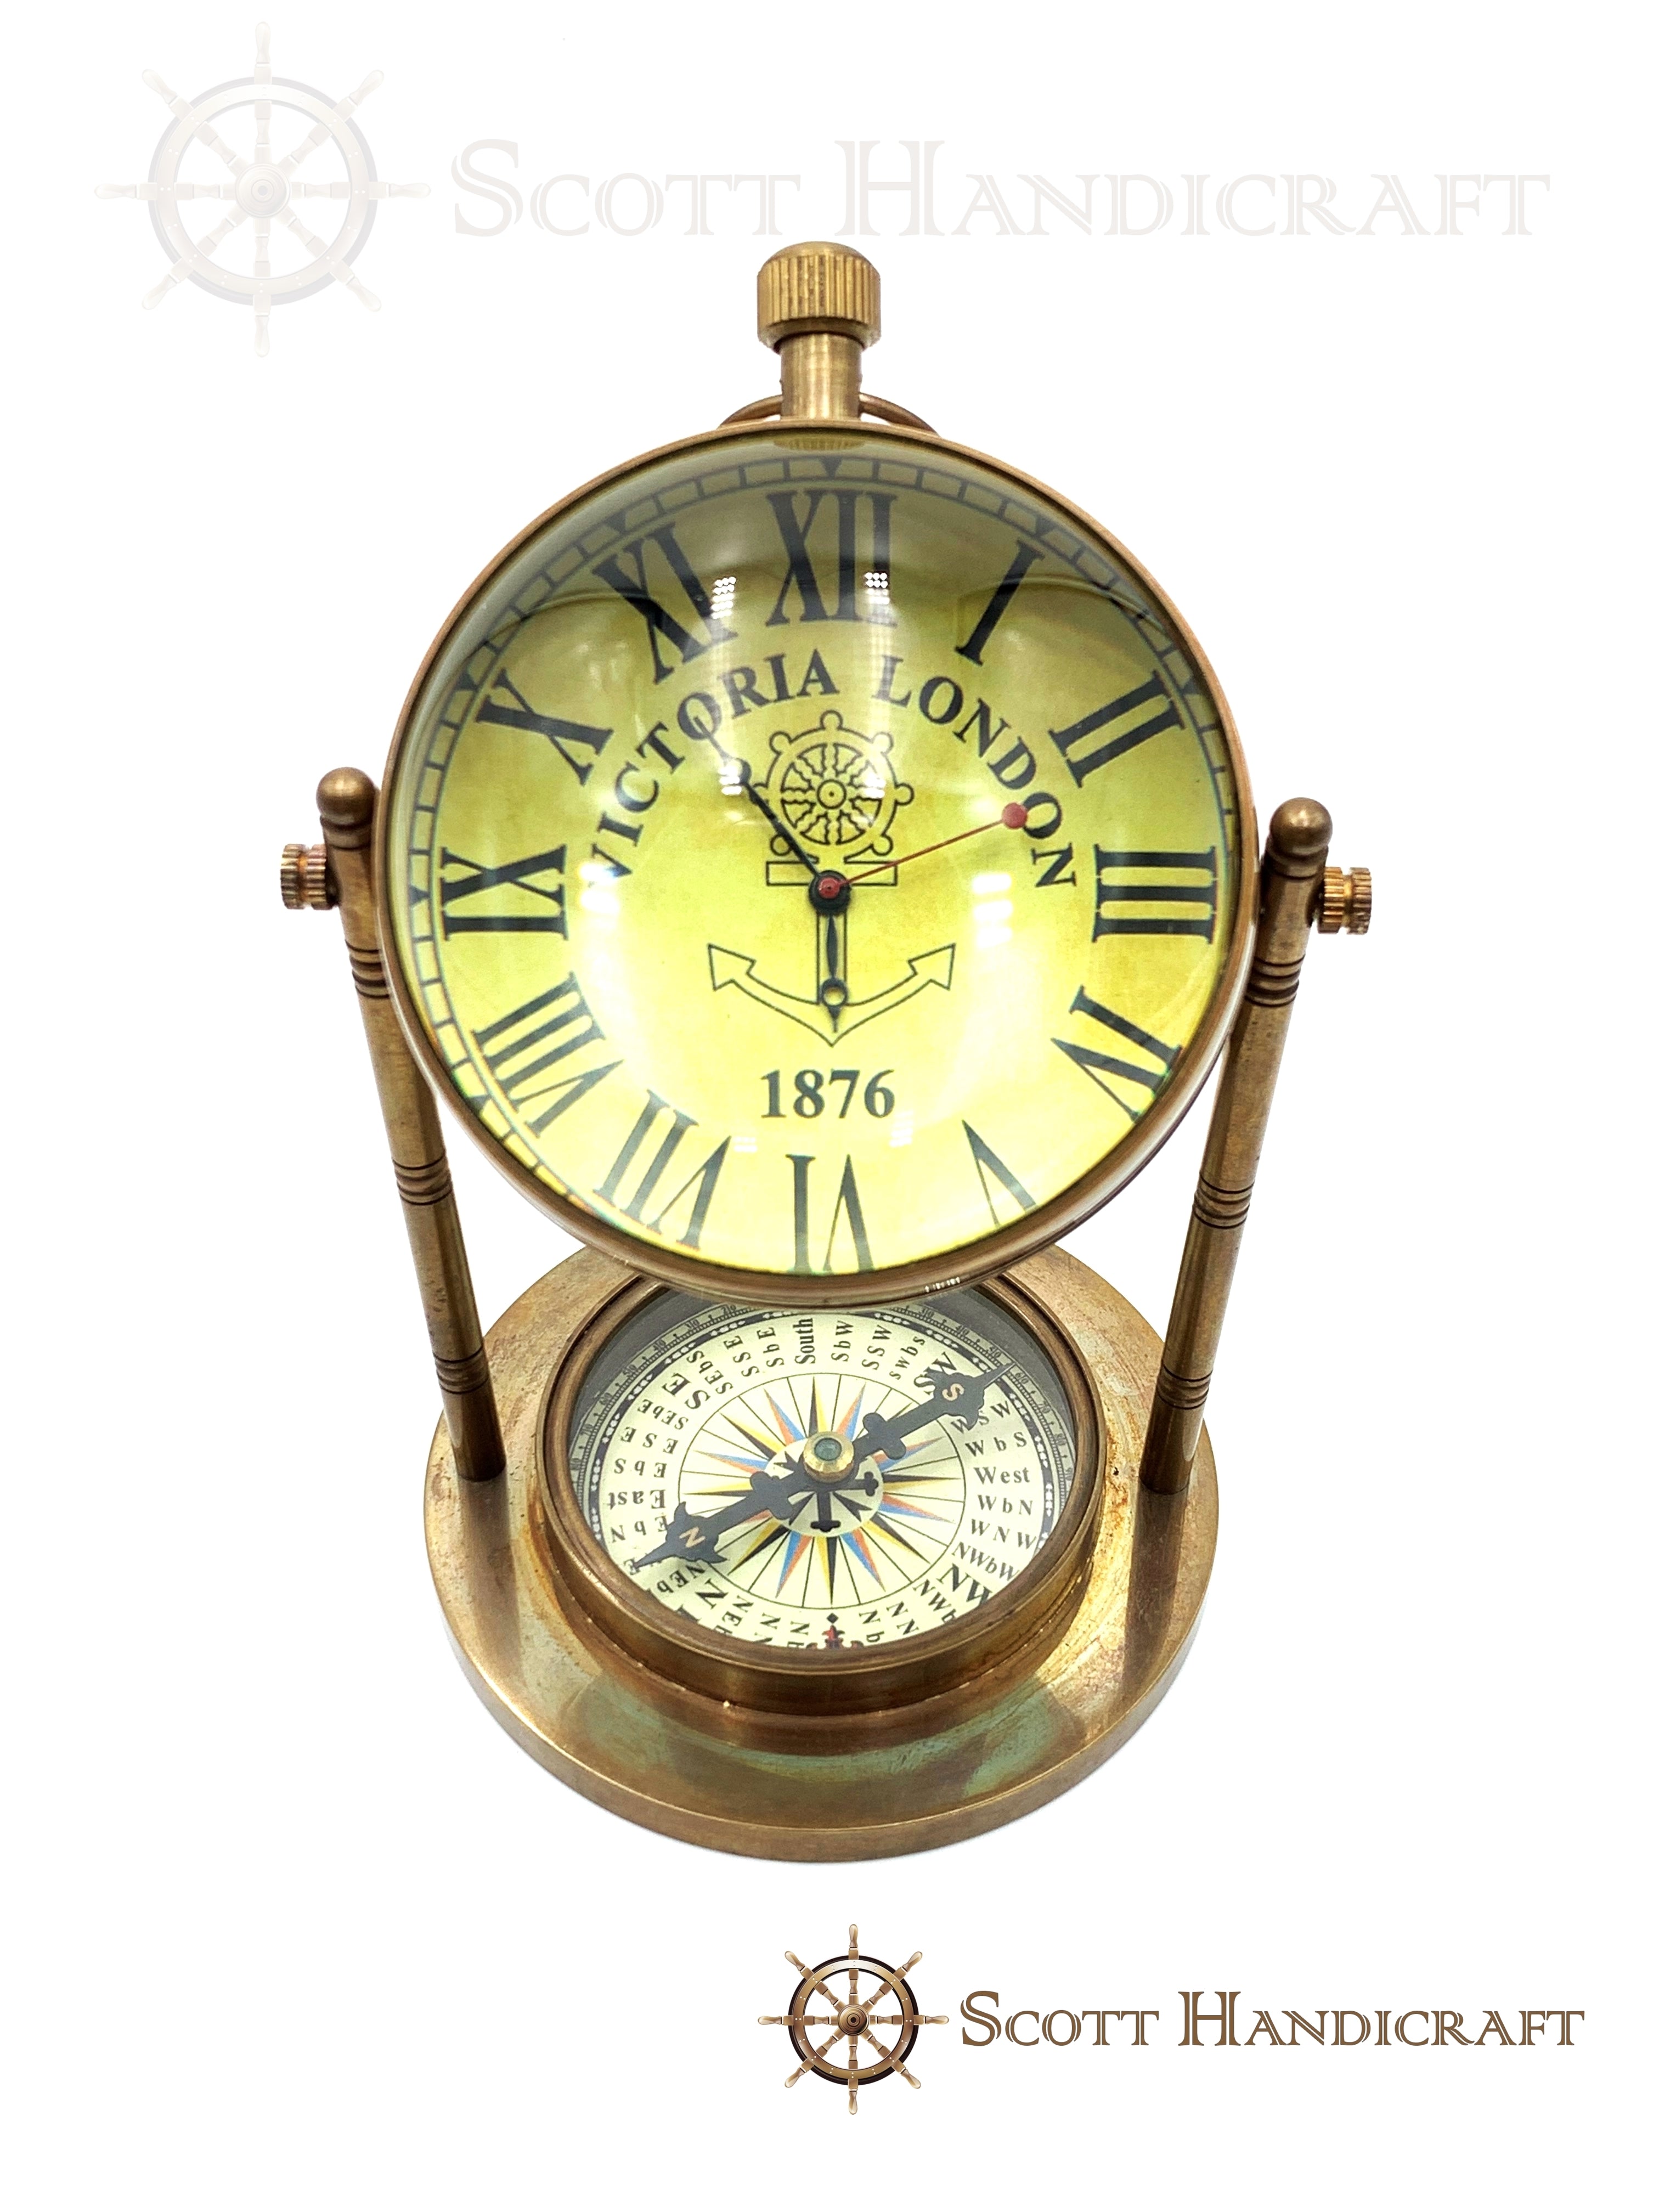 Antique Model Victorian London 1876 Old Style Brass Clock Watch with Compass Vintage Desk Table/Office Table Decor